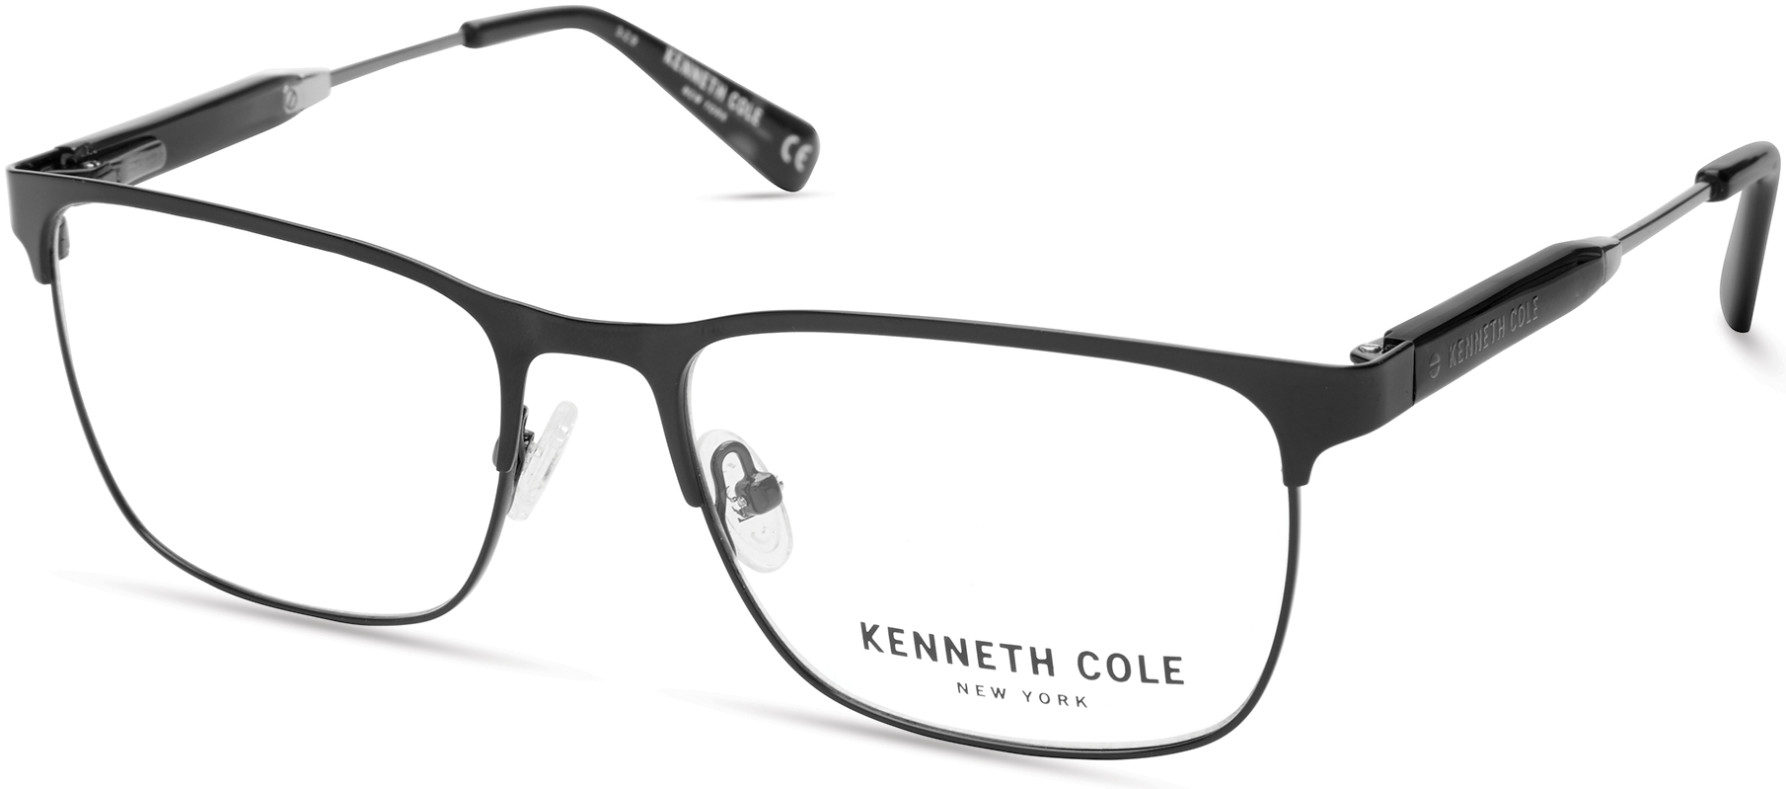 KENNETH COLE NY 0312